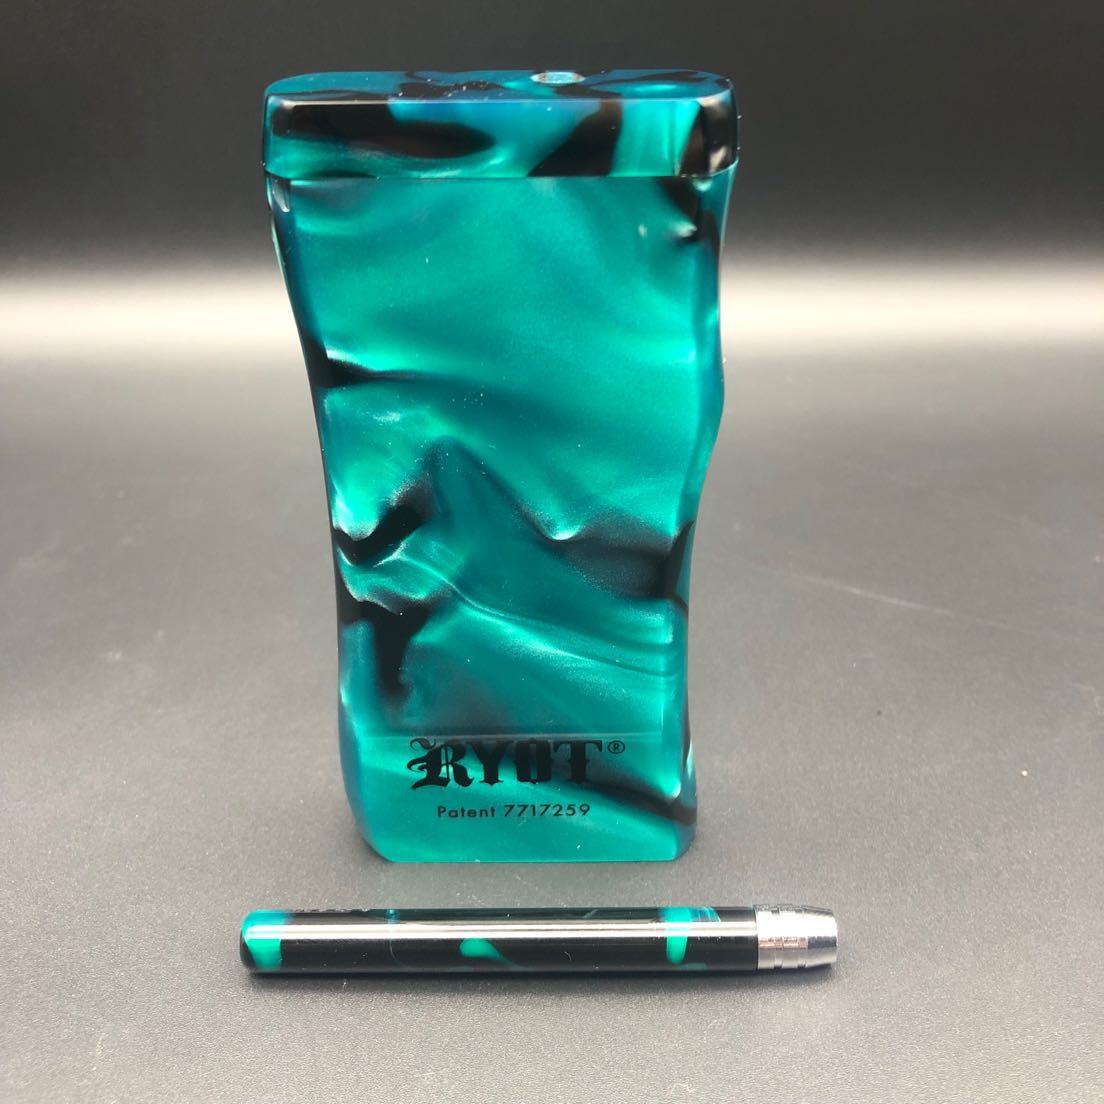 RYOT Acrylic Magnetic Taster Box - 3" / Large - teal